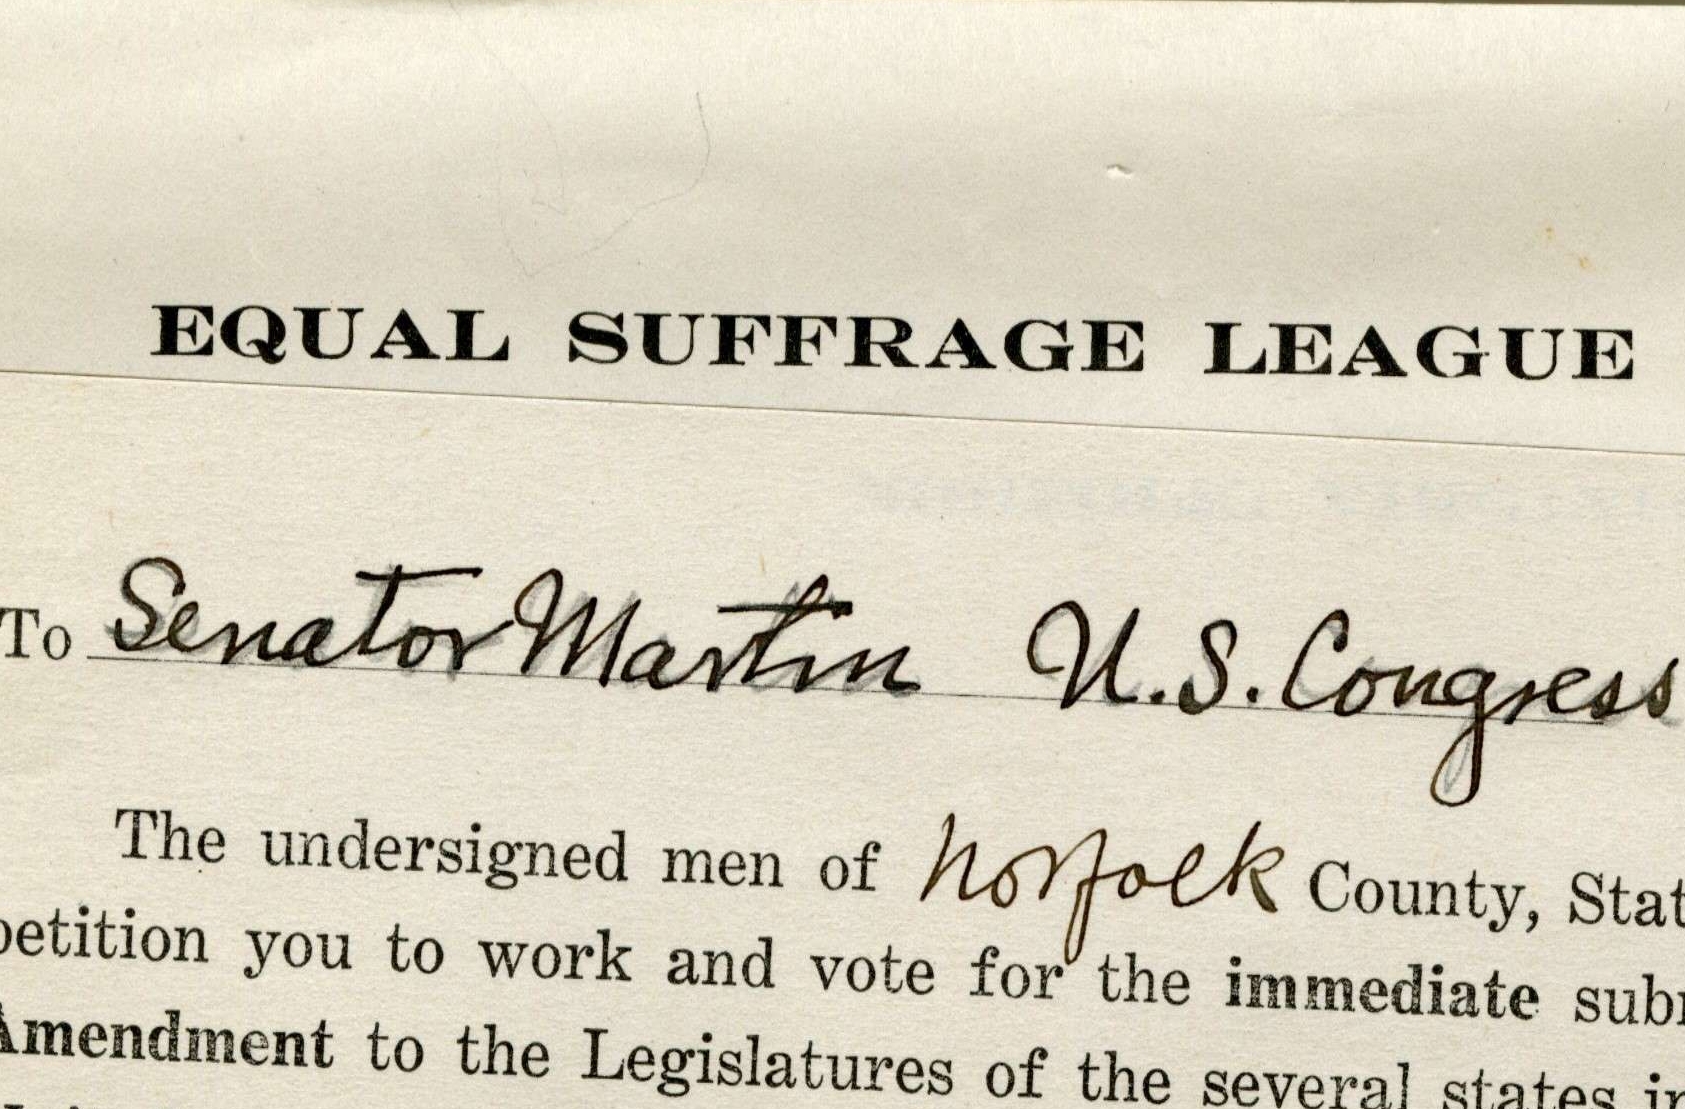 Petition from the Men of the Equal Suffrage League of Norfolk